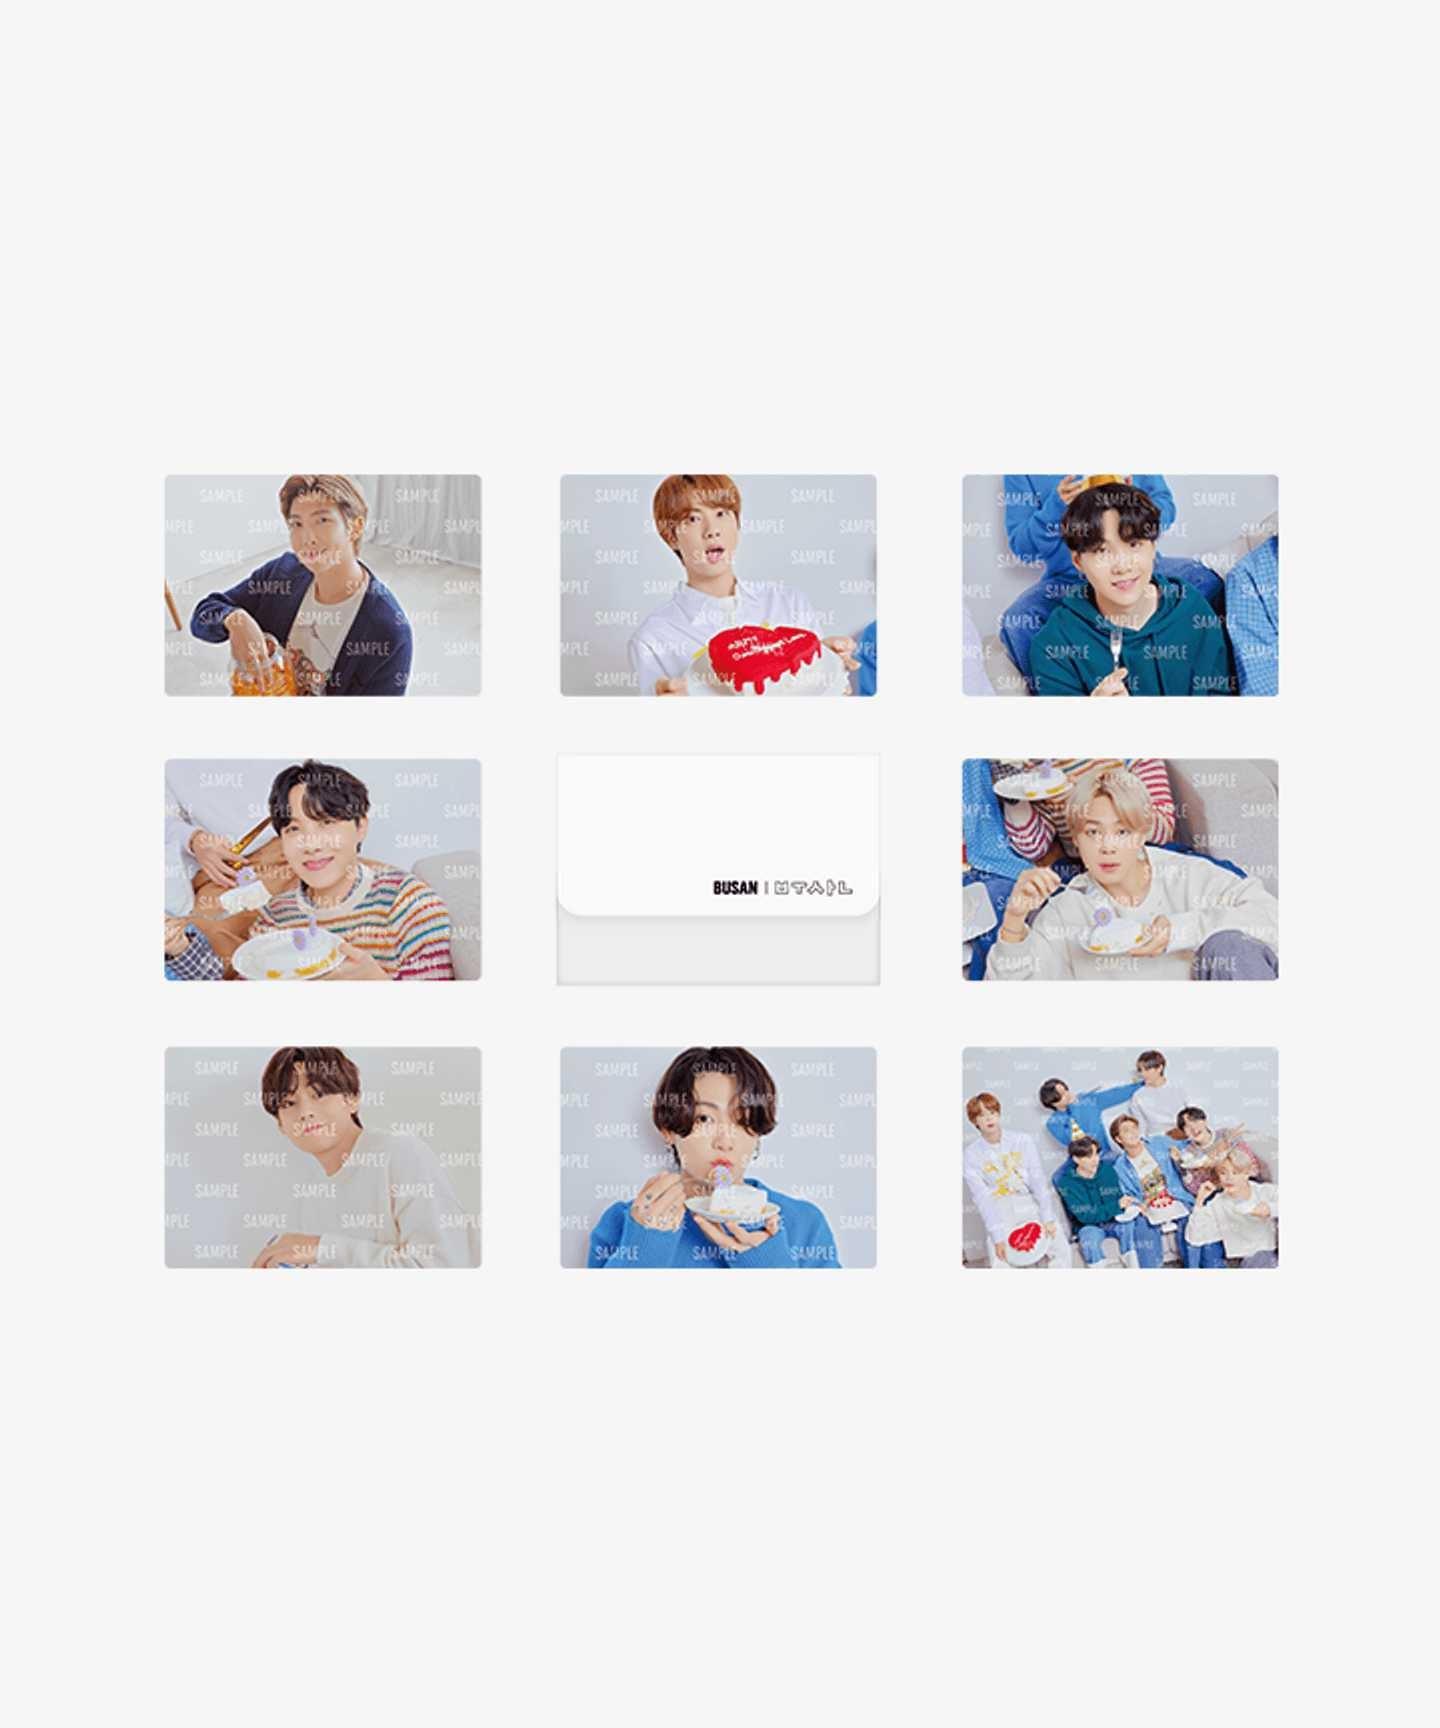 Yet To Come in Busan Mini Photocard Big Hit